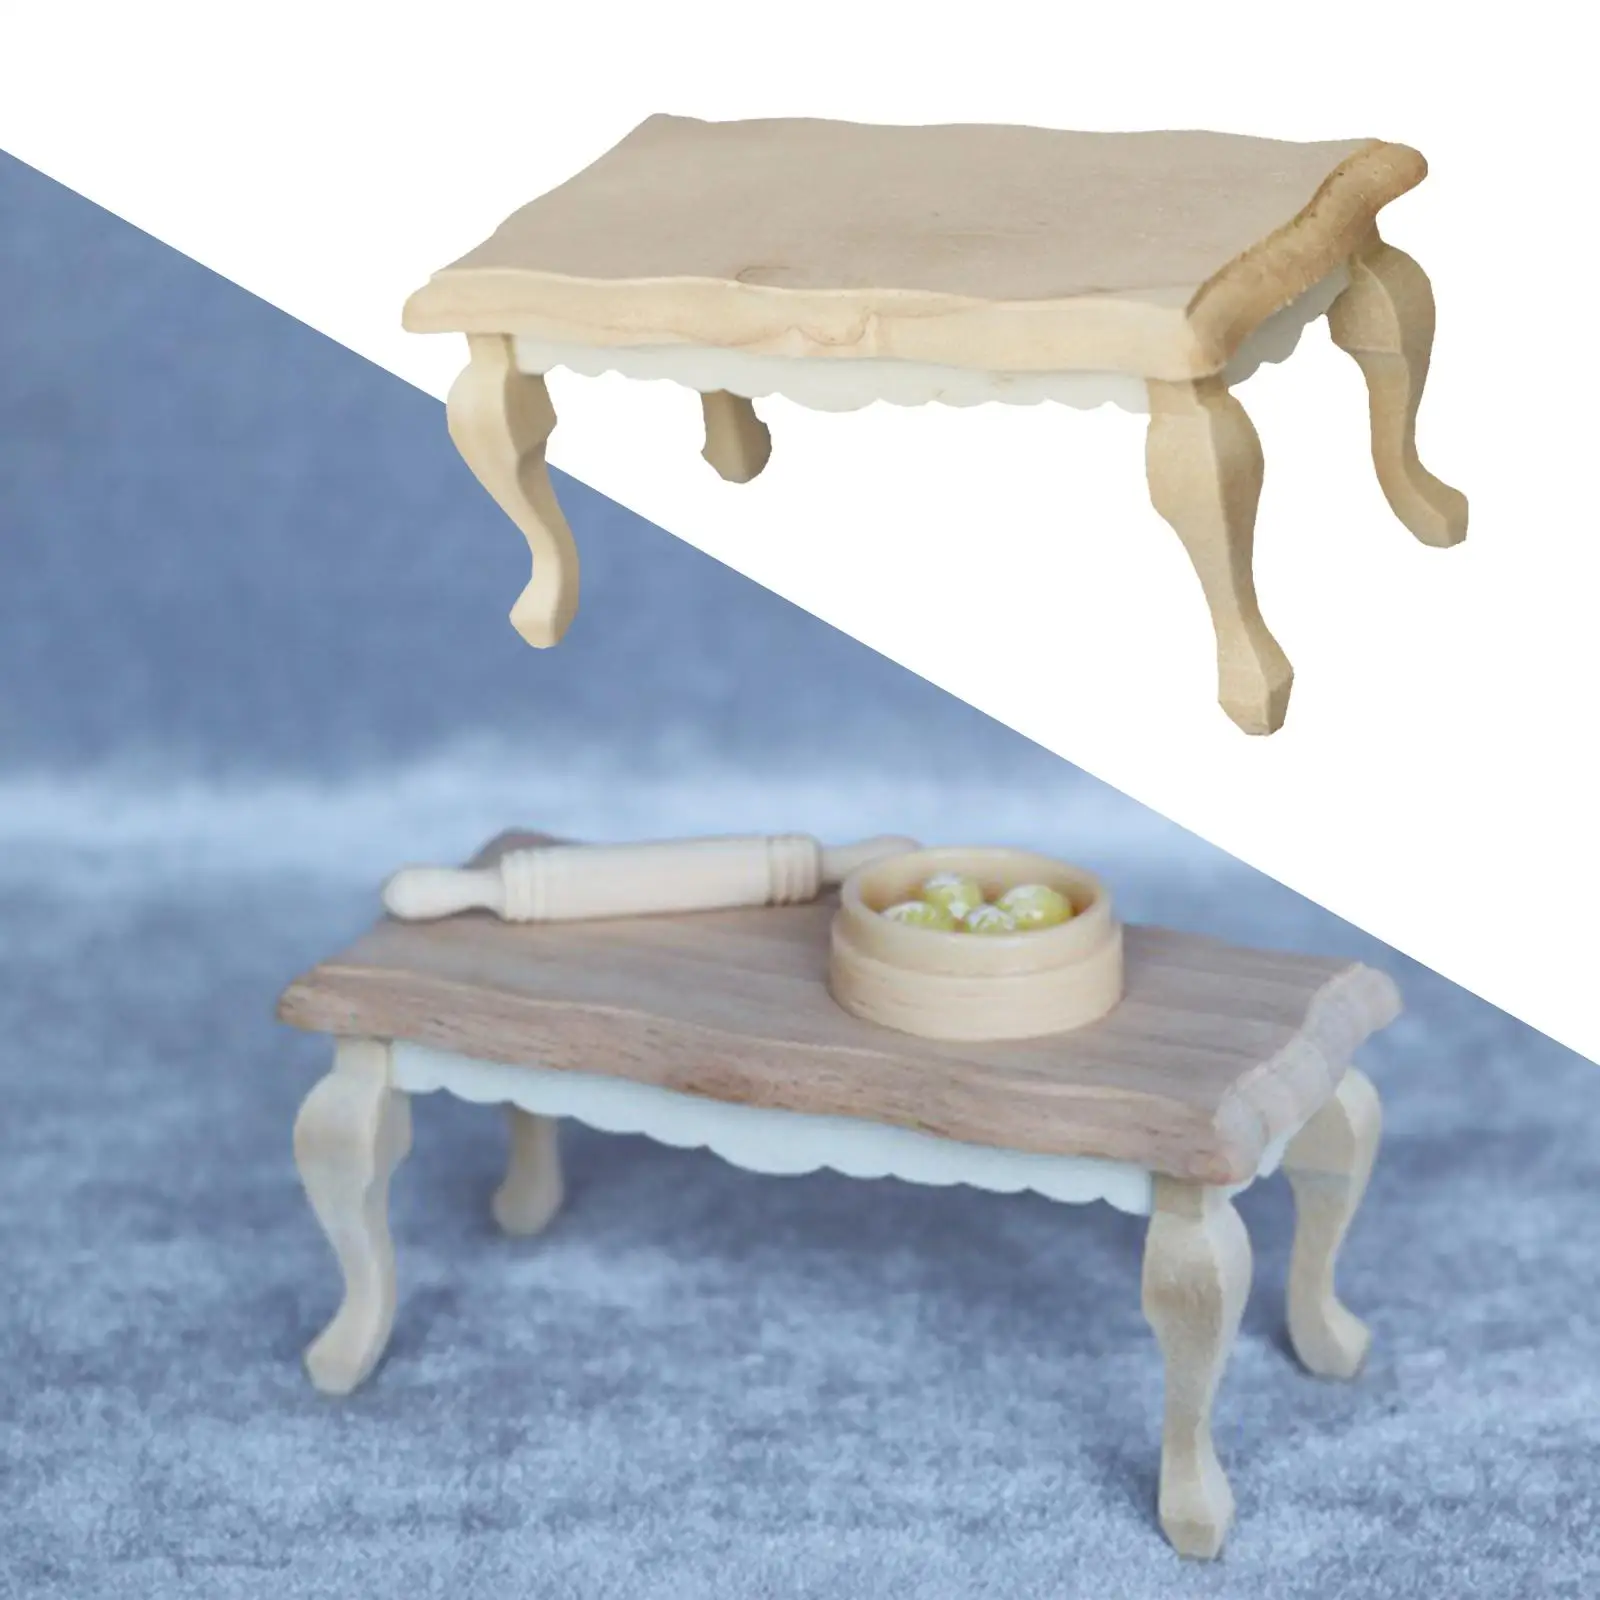 1/12 Dollhouse Table Mini Doll House Decor Shooting Props Wooden Teatable for Baby Girls